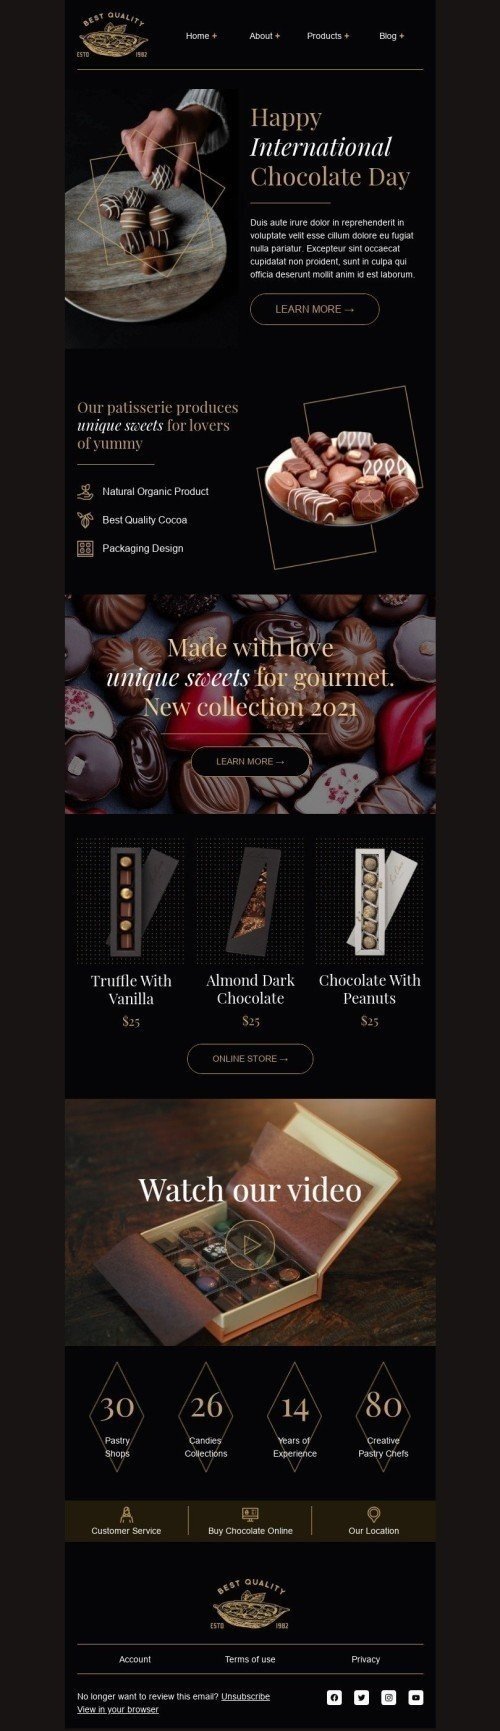 International Chocolate Day Email Template «Made with love» for Food industry mobile view